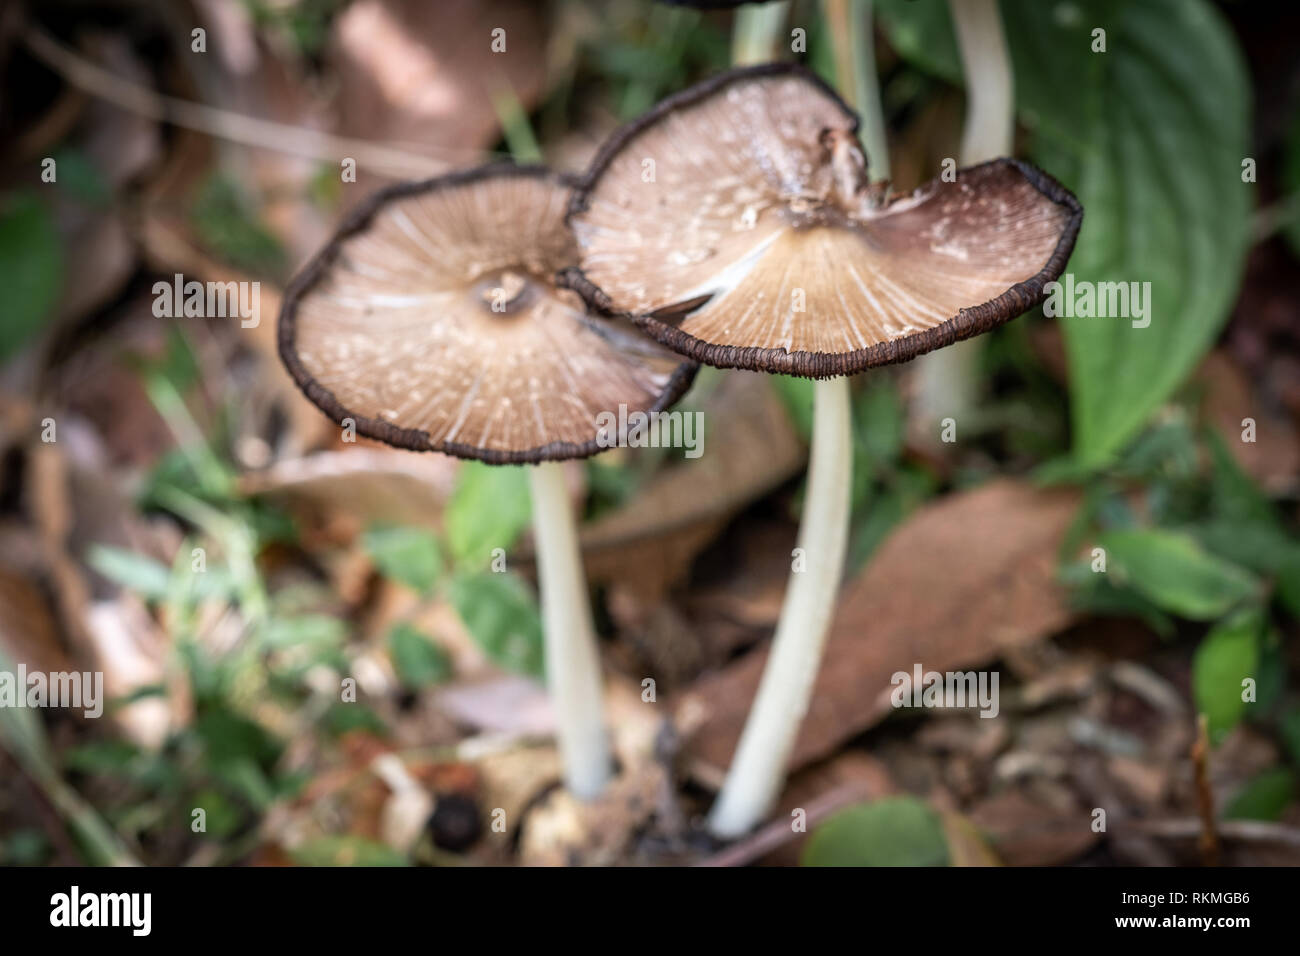 Closeup of inedible mushrooms that grew naturally on well-manured land in the garden. Stock Photo